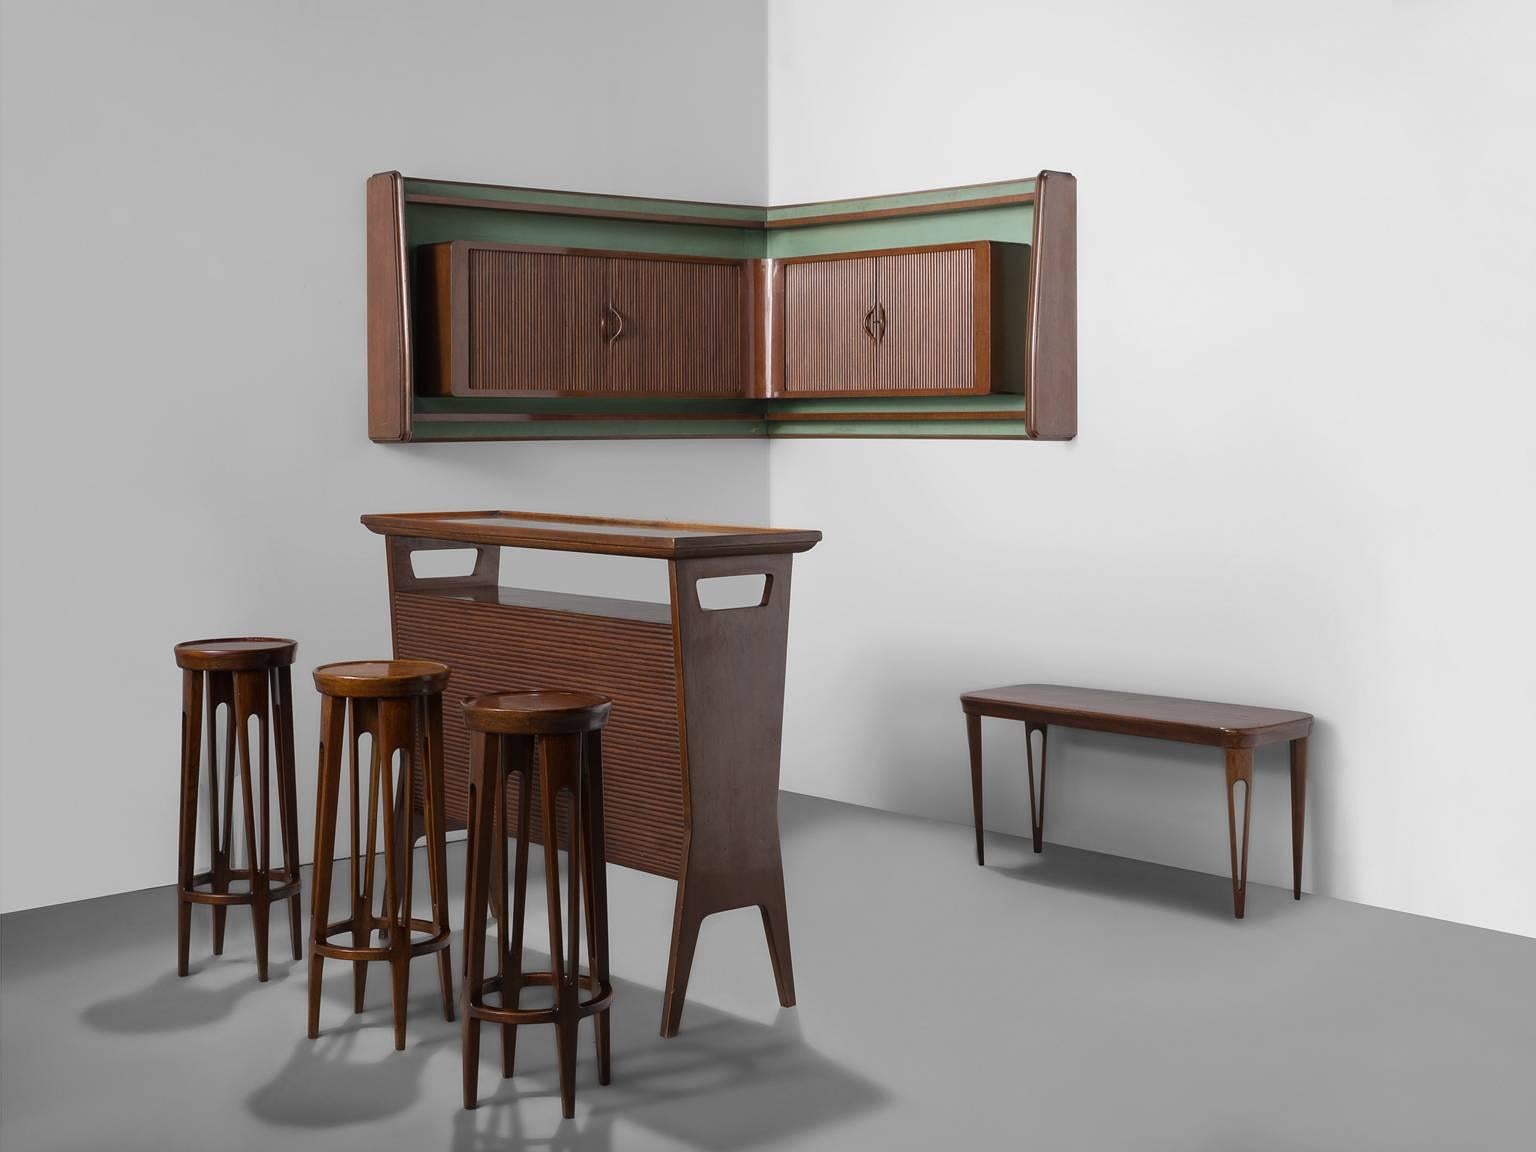 Bar set with stools, bar, side table and wall unit, Italy, 1950s. 

This elegant, playful set of bar furniture is executed in Italian walnut and shows typical Italian detailing in the tapered open legs, tambour doors and the diagonal lining. The set